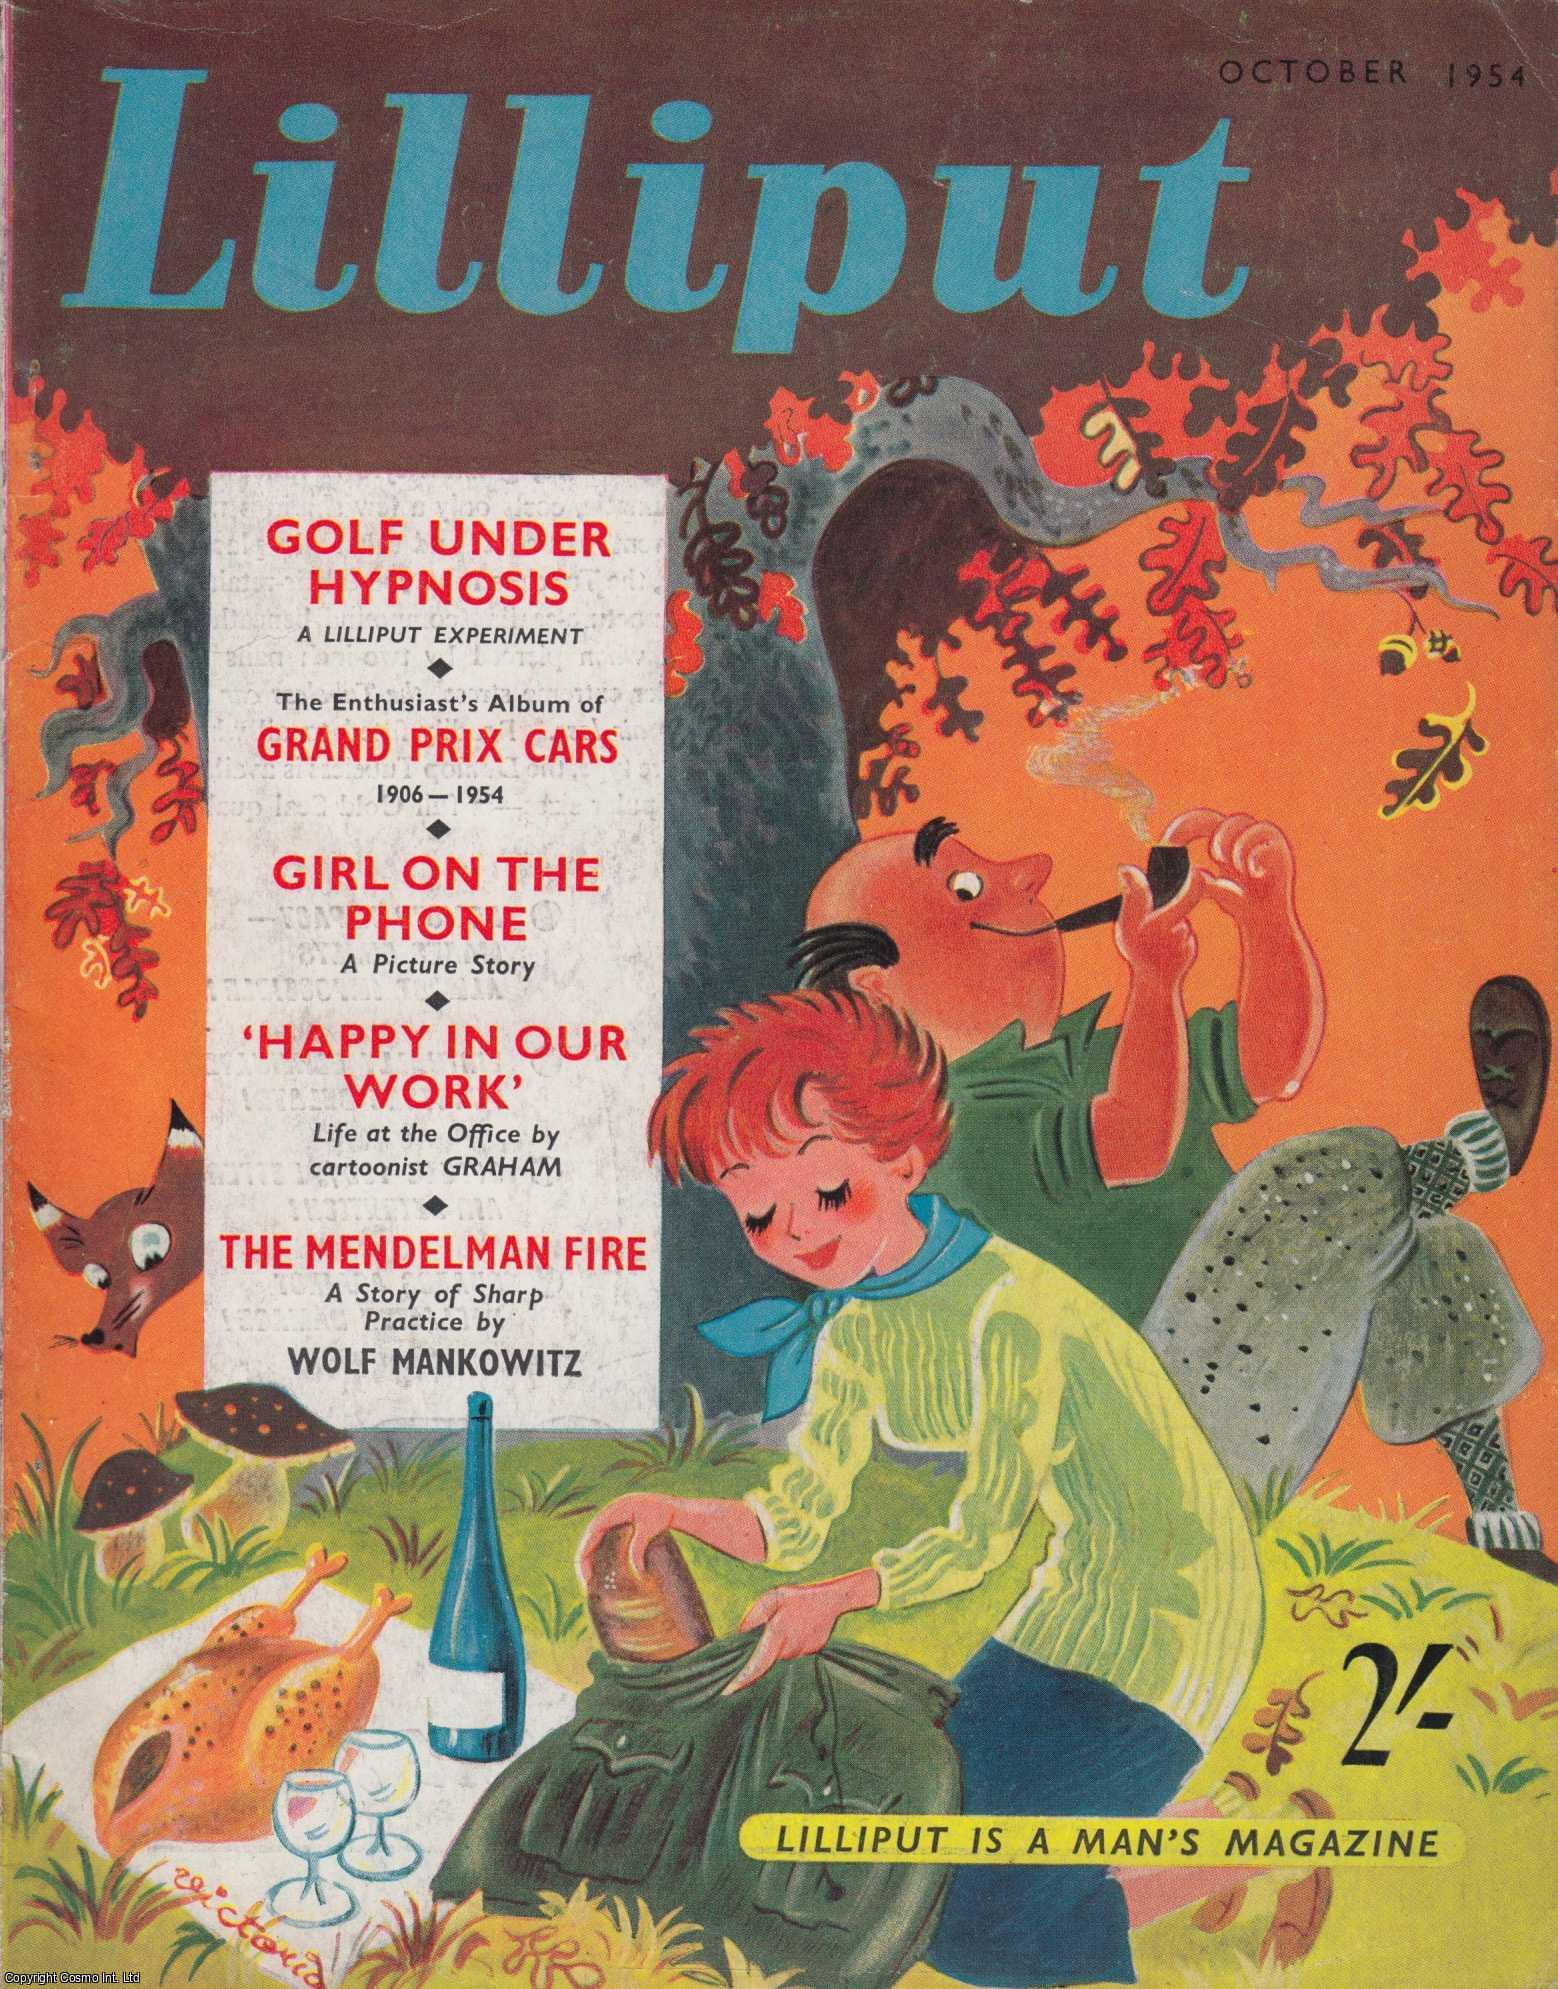 Lilliput - Lilliput Magazine. Oct 1954. Vol.35 no.4 Issue no.208. Wolf Mankowitz story 'The Mendelman Fire', and other pieces.